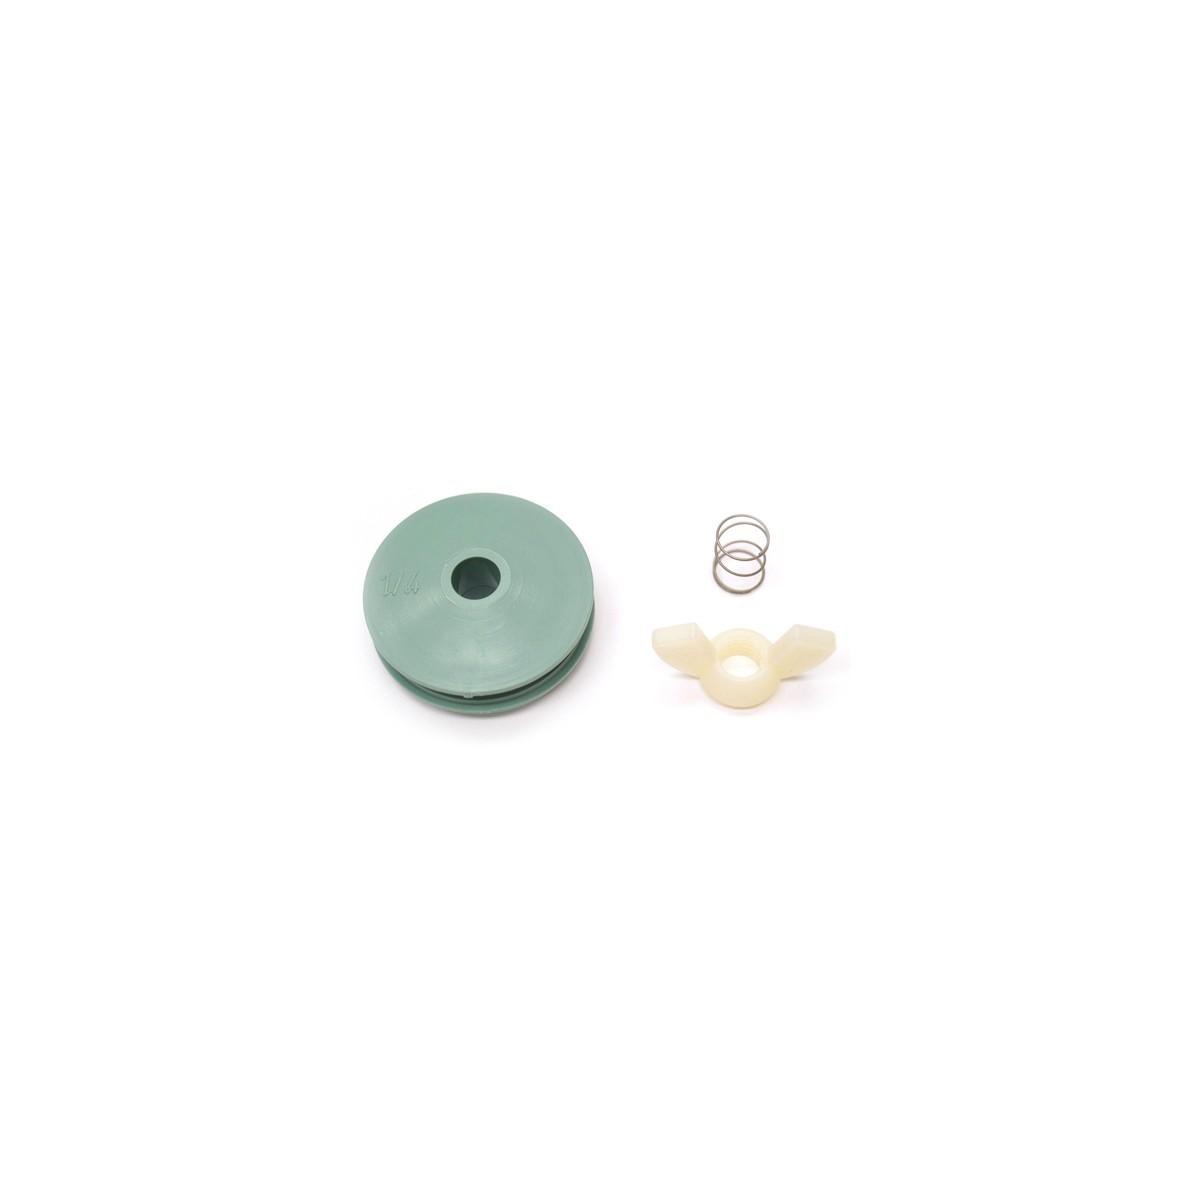 11898- 1/4 Table Foiler Replacement Wheel